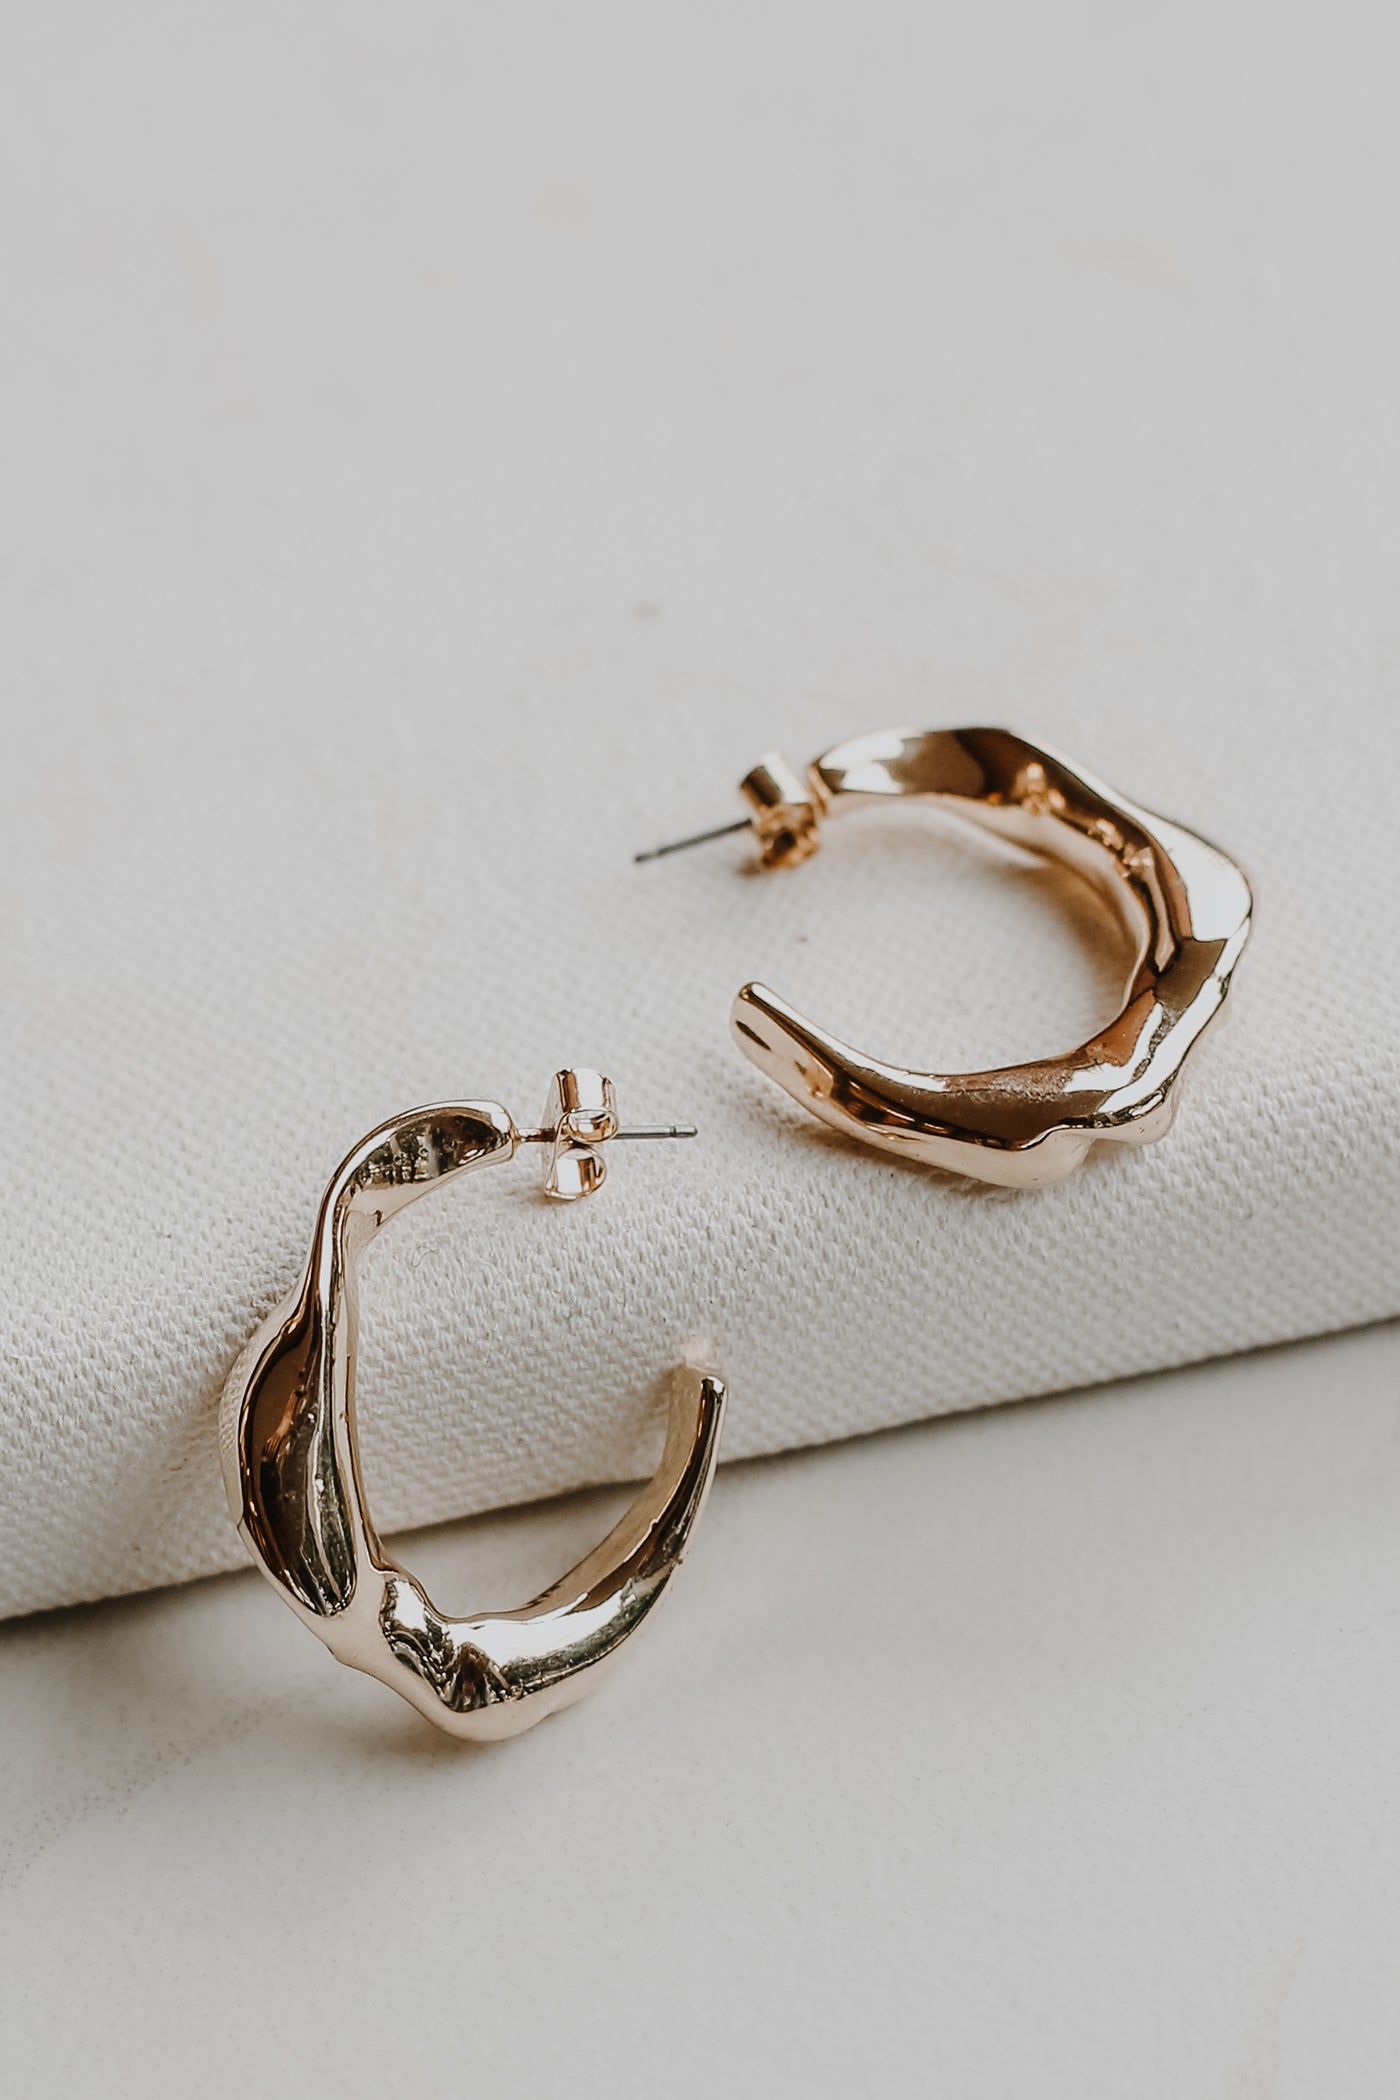 Gold Hammered Hoop Earrings from dress up